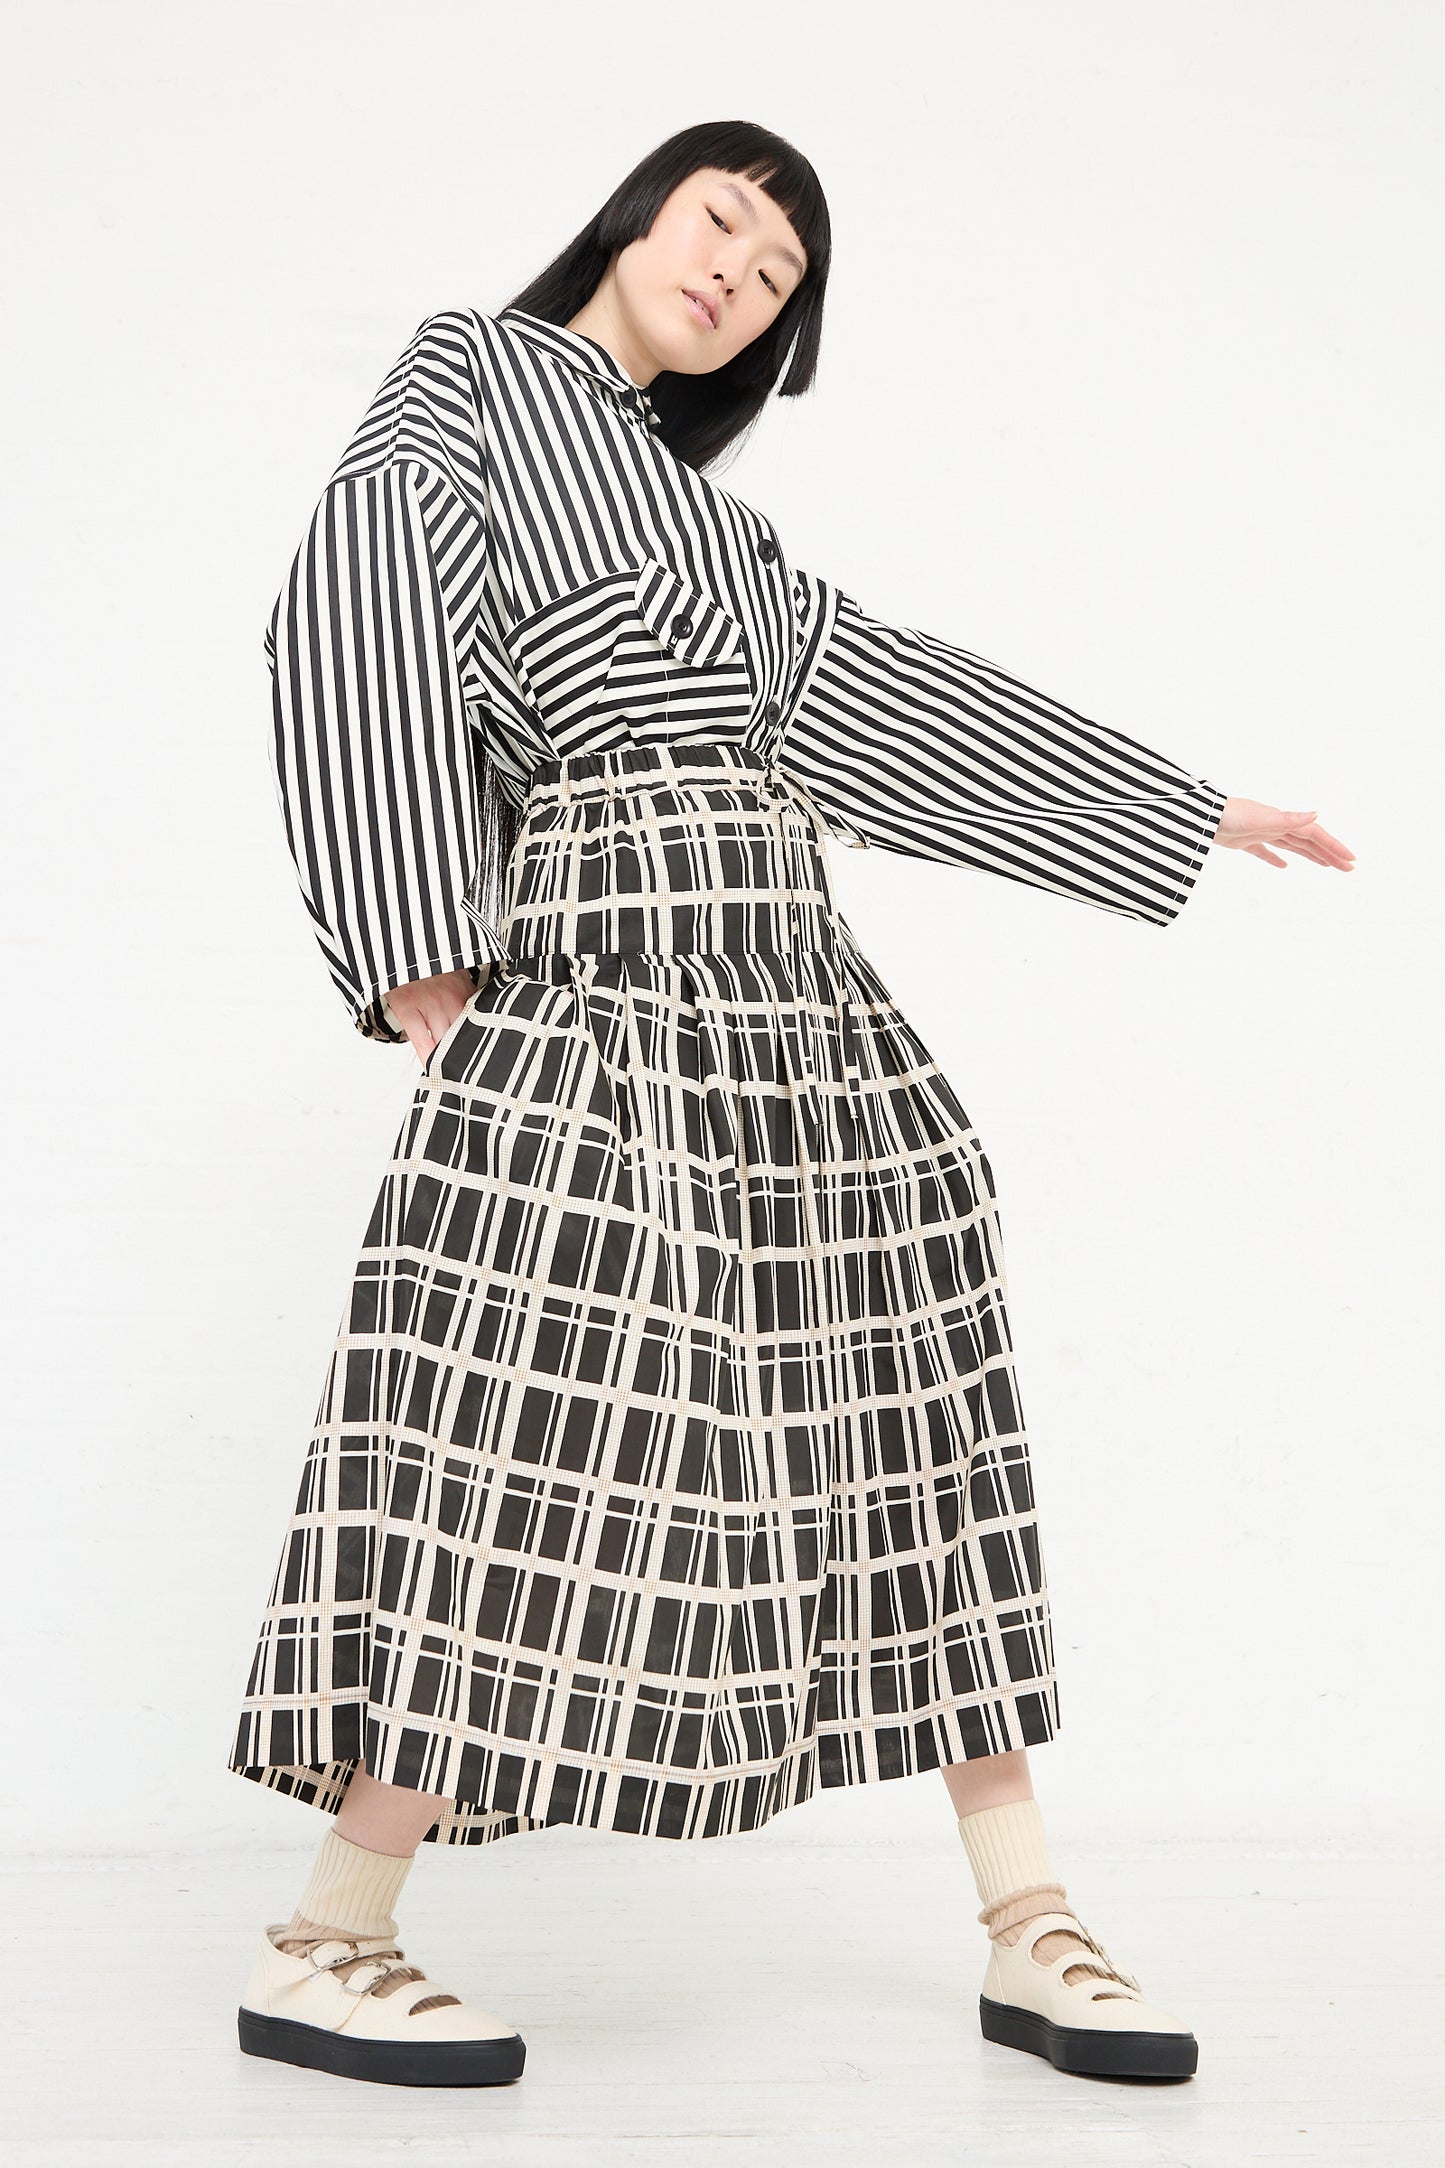 Woman posing in a KasMaria Cotton Pleated Long Skirt in Grid Print against a white background.